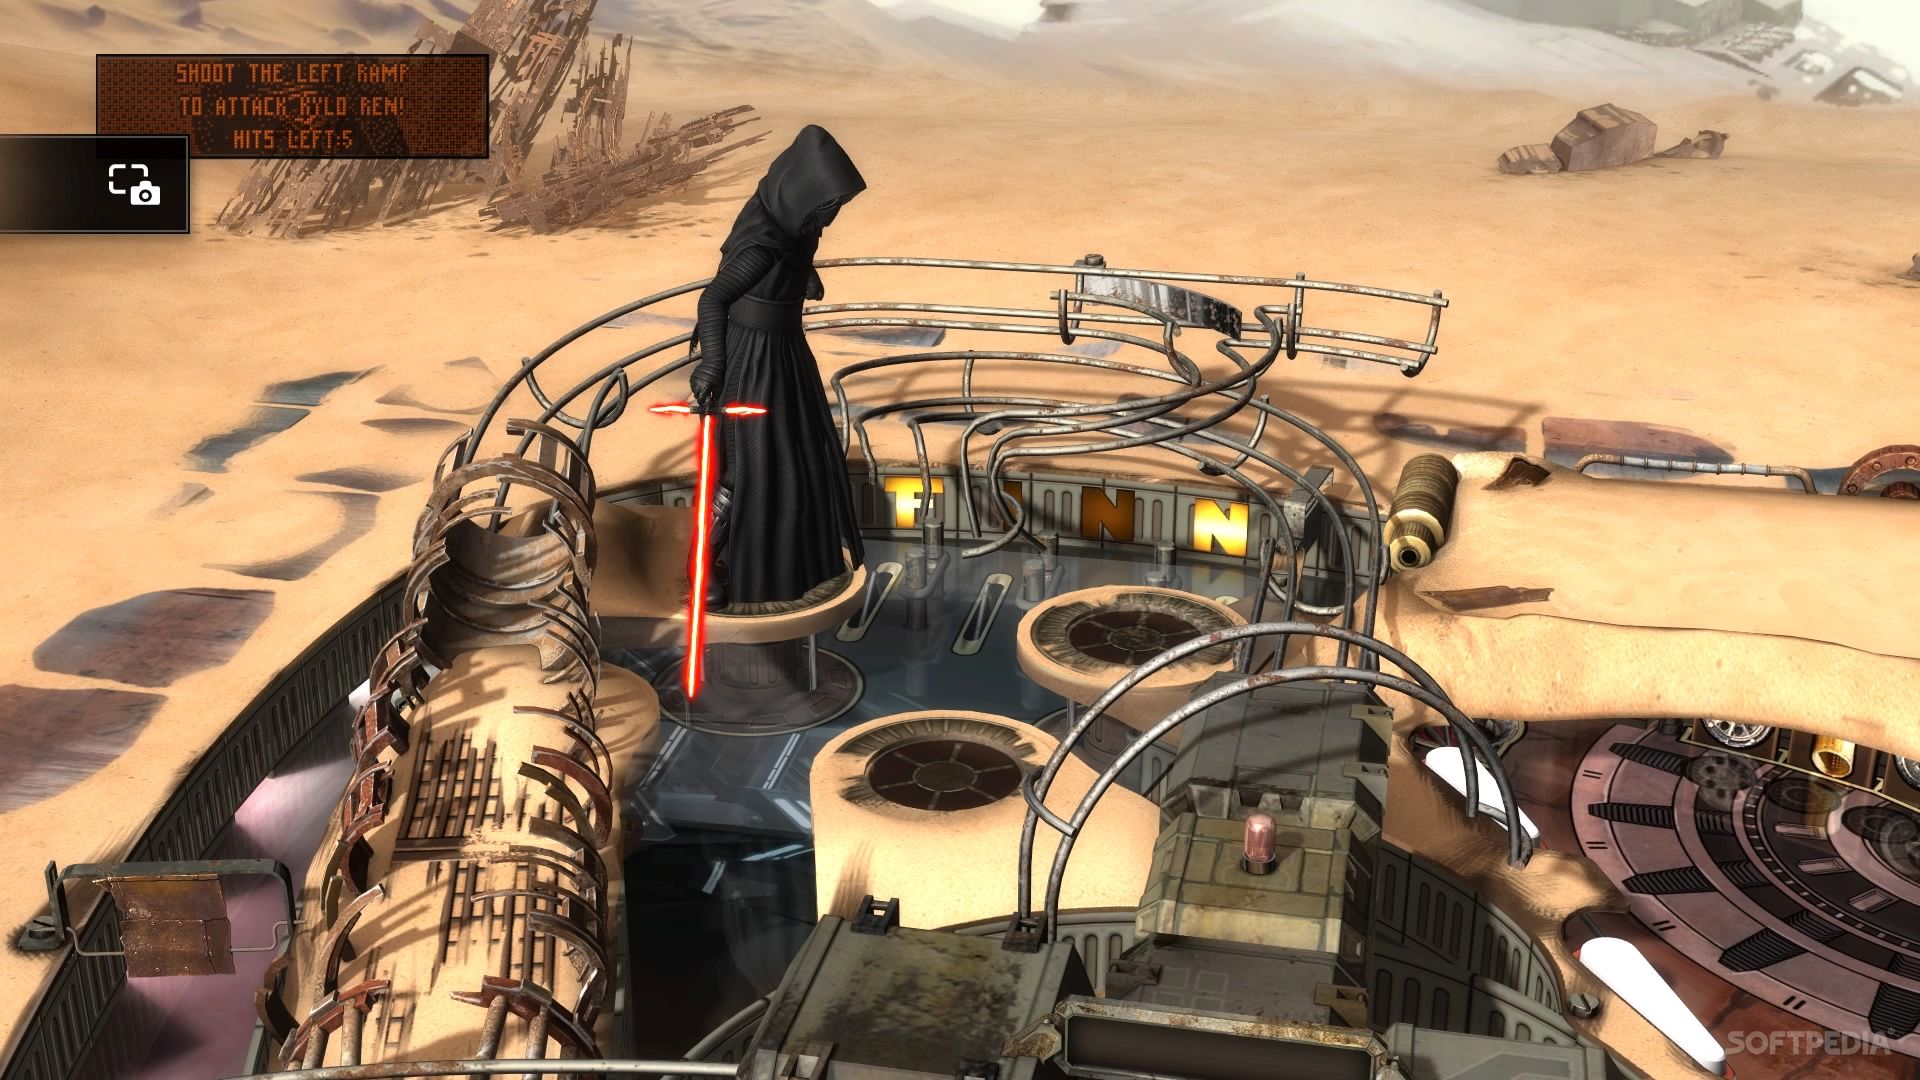 free download star wars the force awakens game